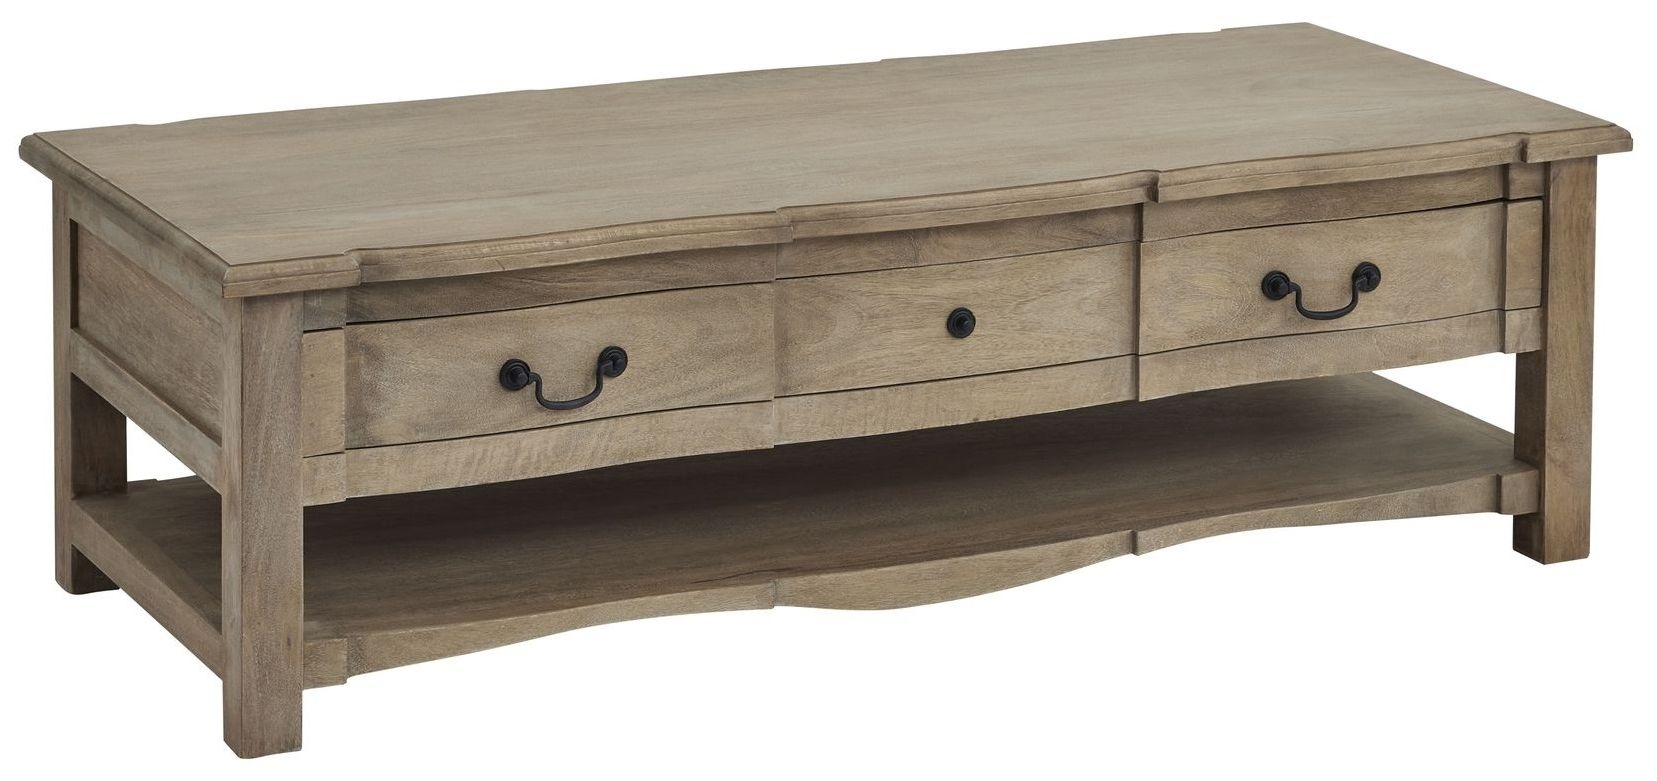 Hill Interiors Wooden 2 Drawer Coffee Table